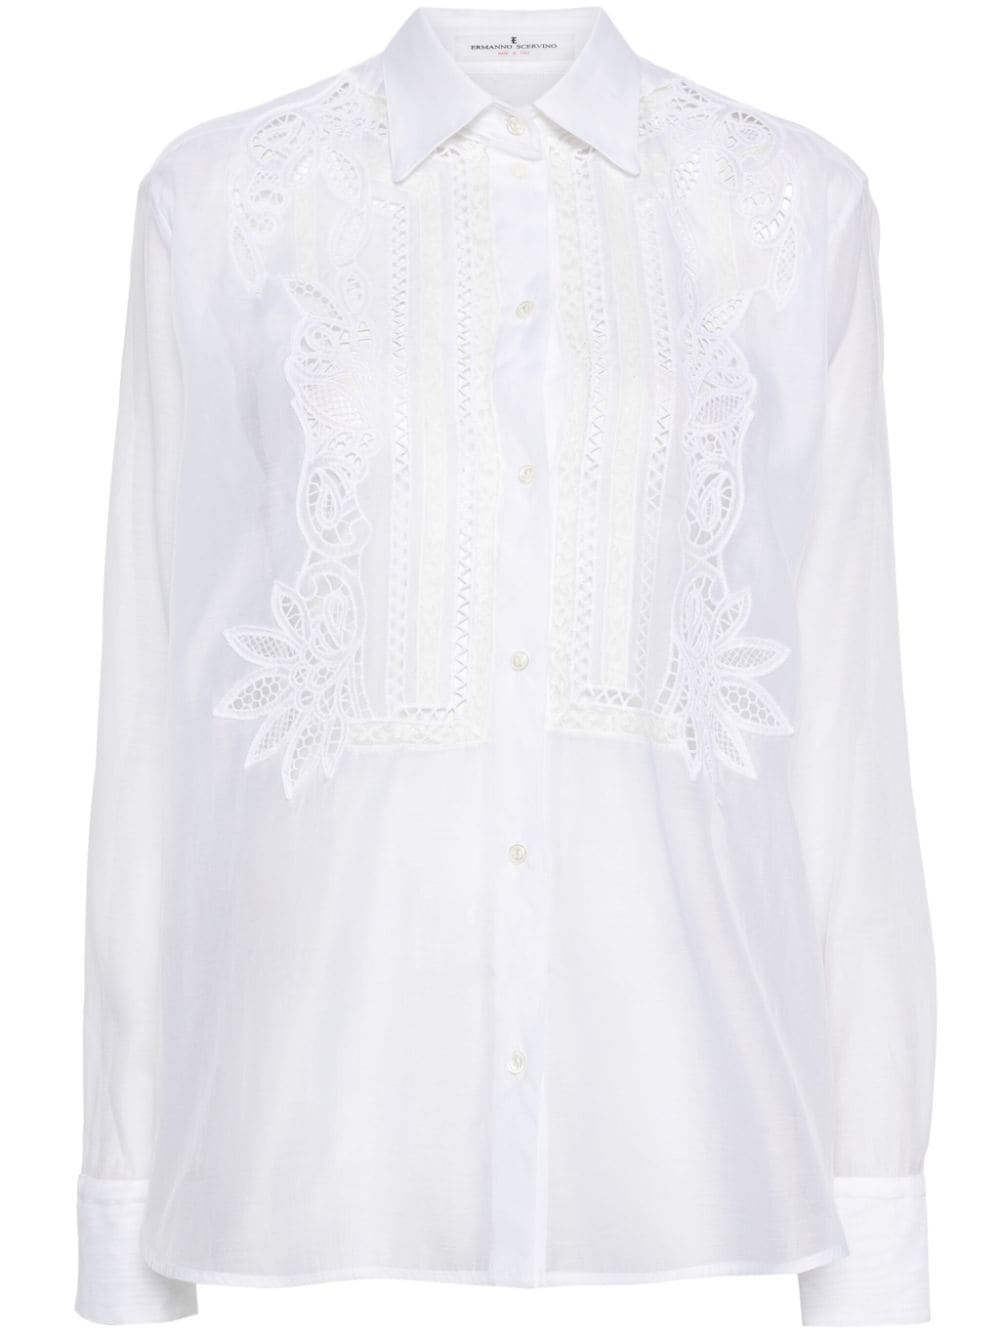 ERMANNO SCERVINO White Embroidered Semi-Sheer Cotton Shirt with Cut-Out Floral Detailing